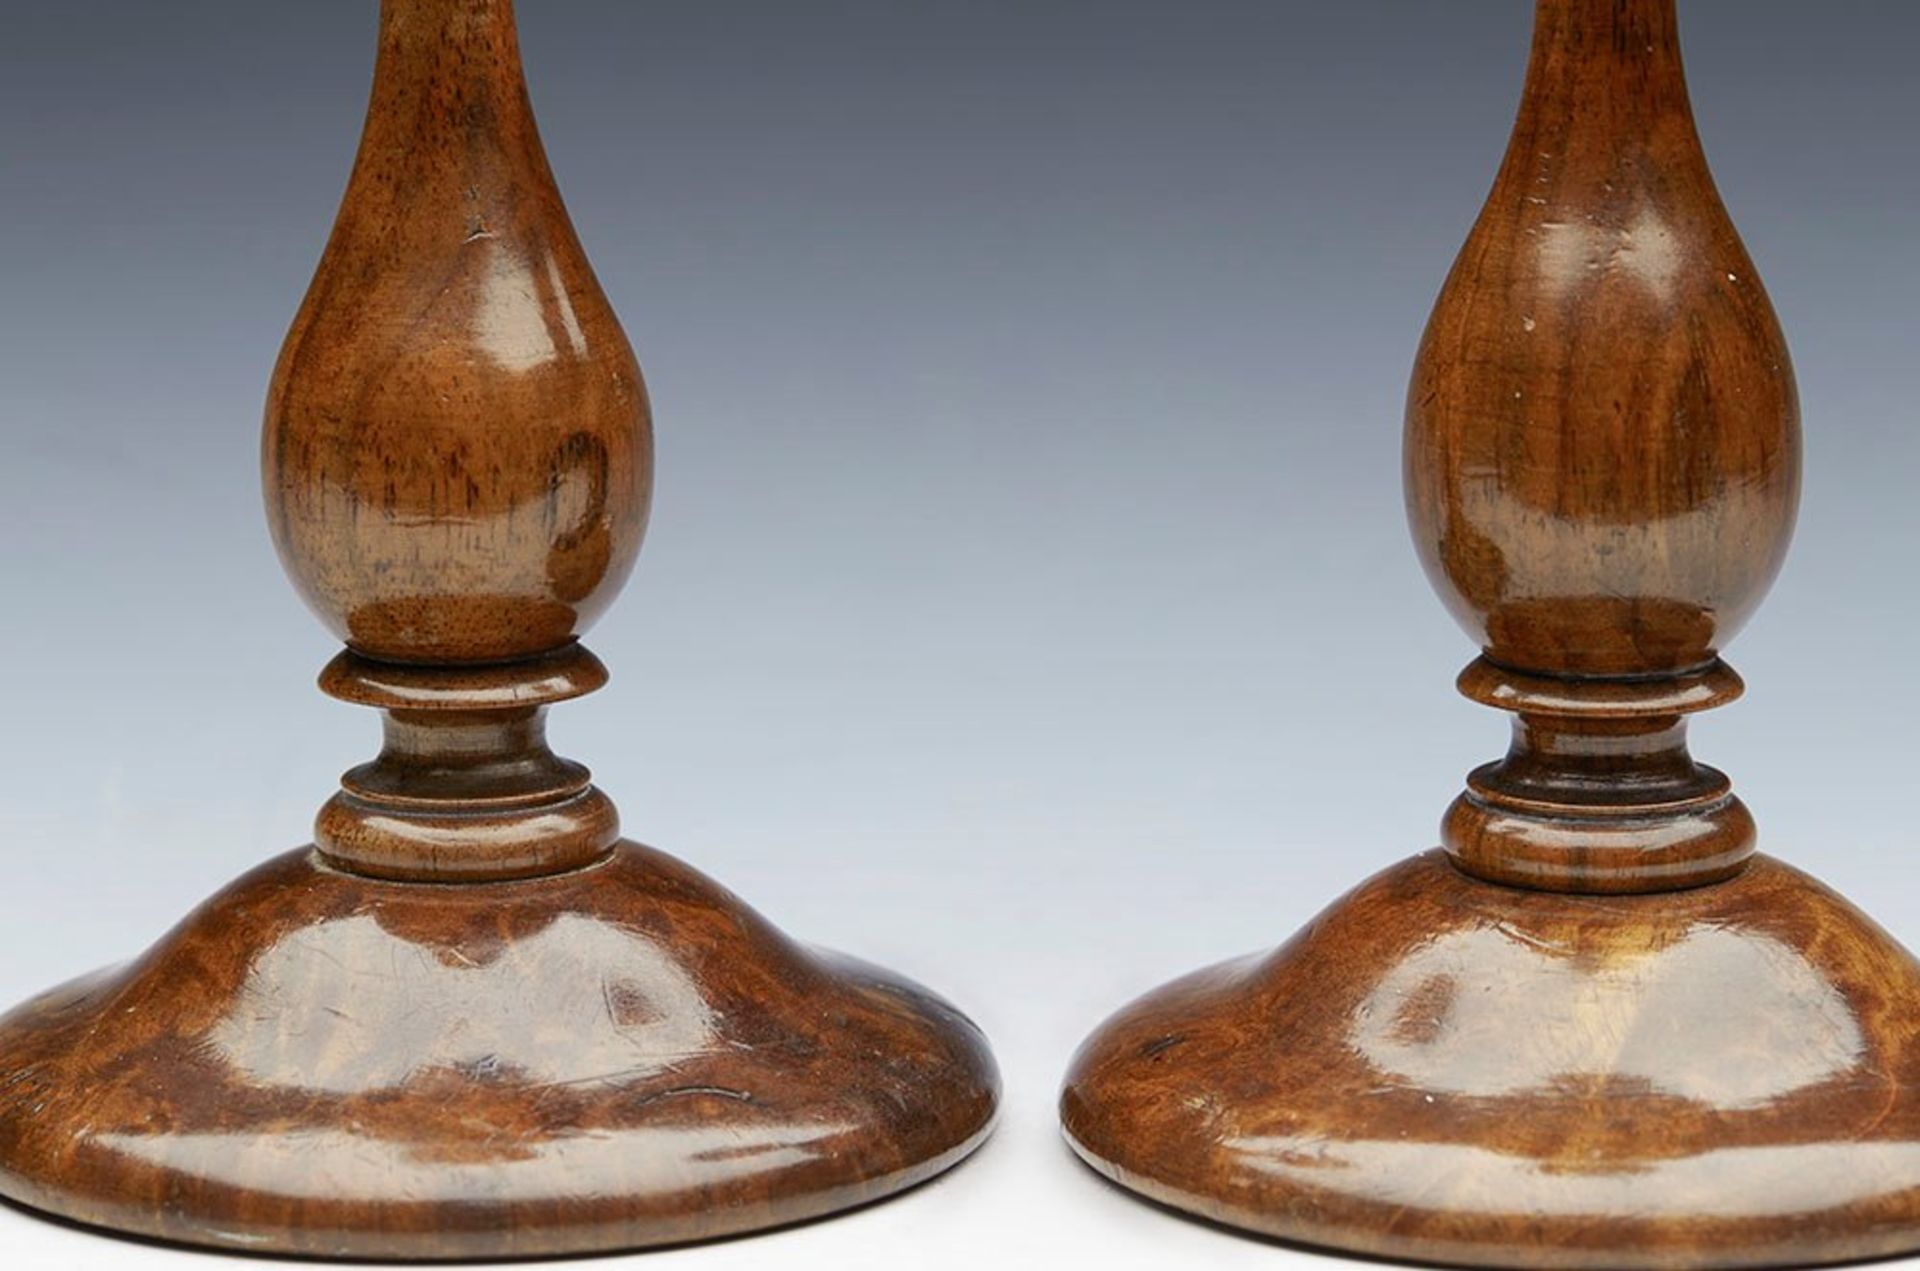 ANTIQUE BRASS MOUNTED TURNED WOOD PEDESTAL CANDLESTICKS 19TH C. - Image 2 of 7